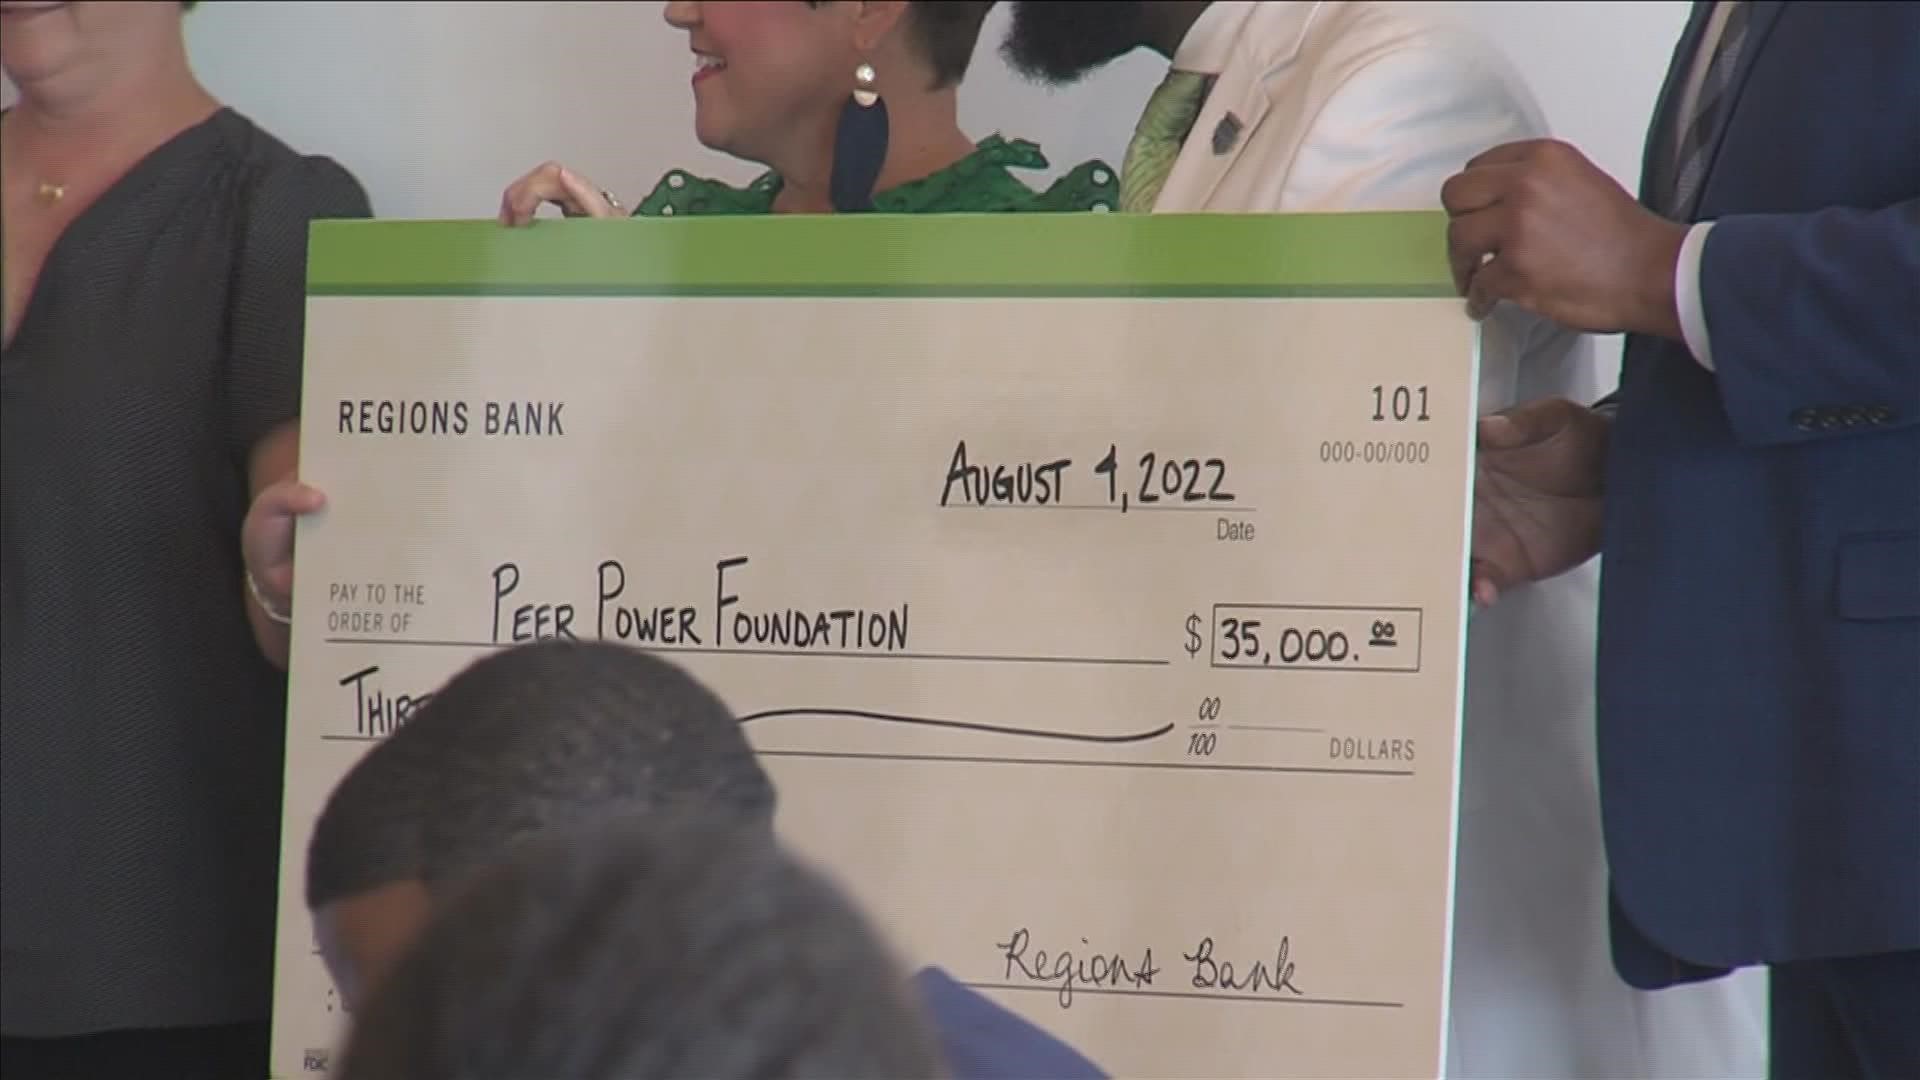 Peer Power got a $35,000 check from Regions Bank to help expand the group's work to more schools.